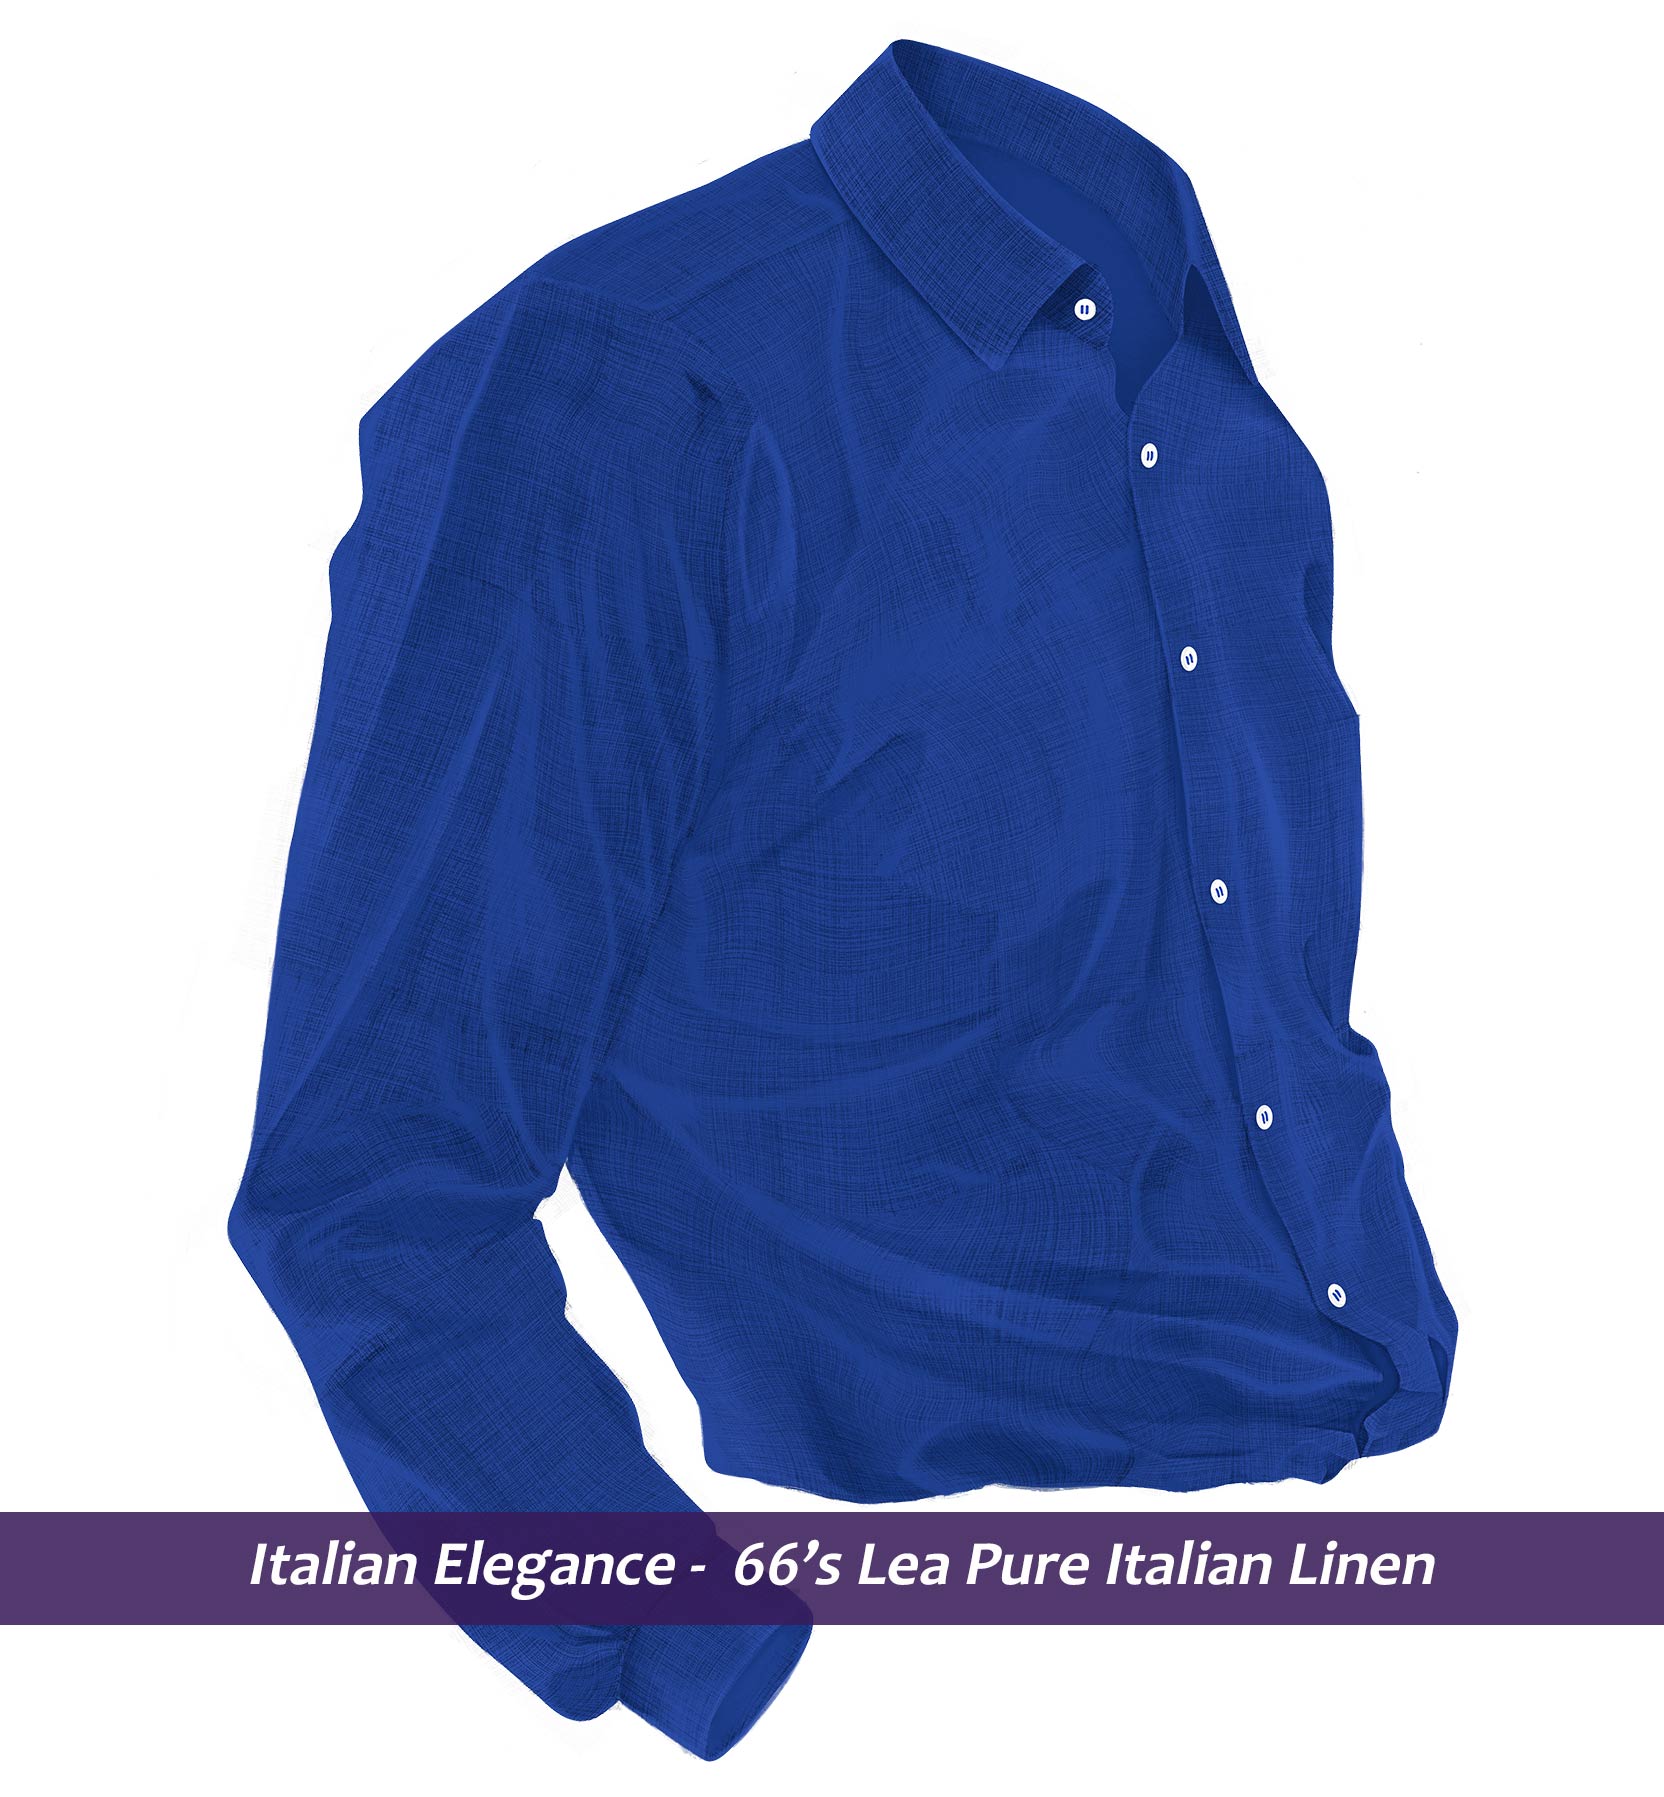 Adelaide- Royal Blue Solid Linen- 66's Lea Pure Italian Linen- Delivery from 20th March